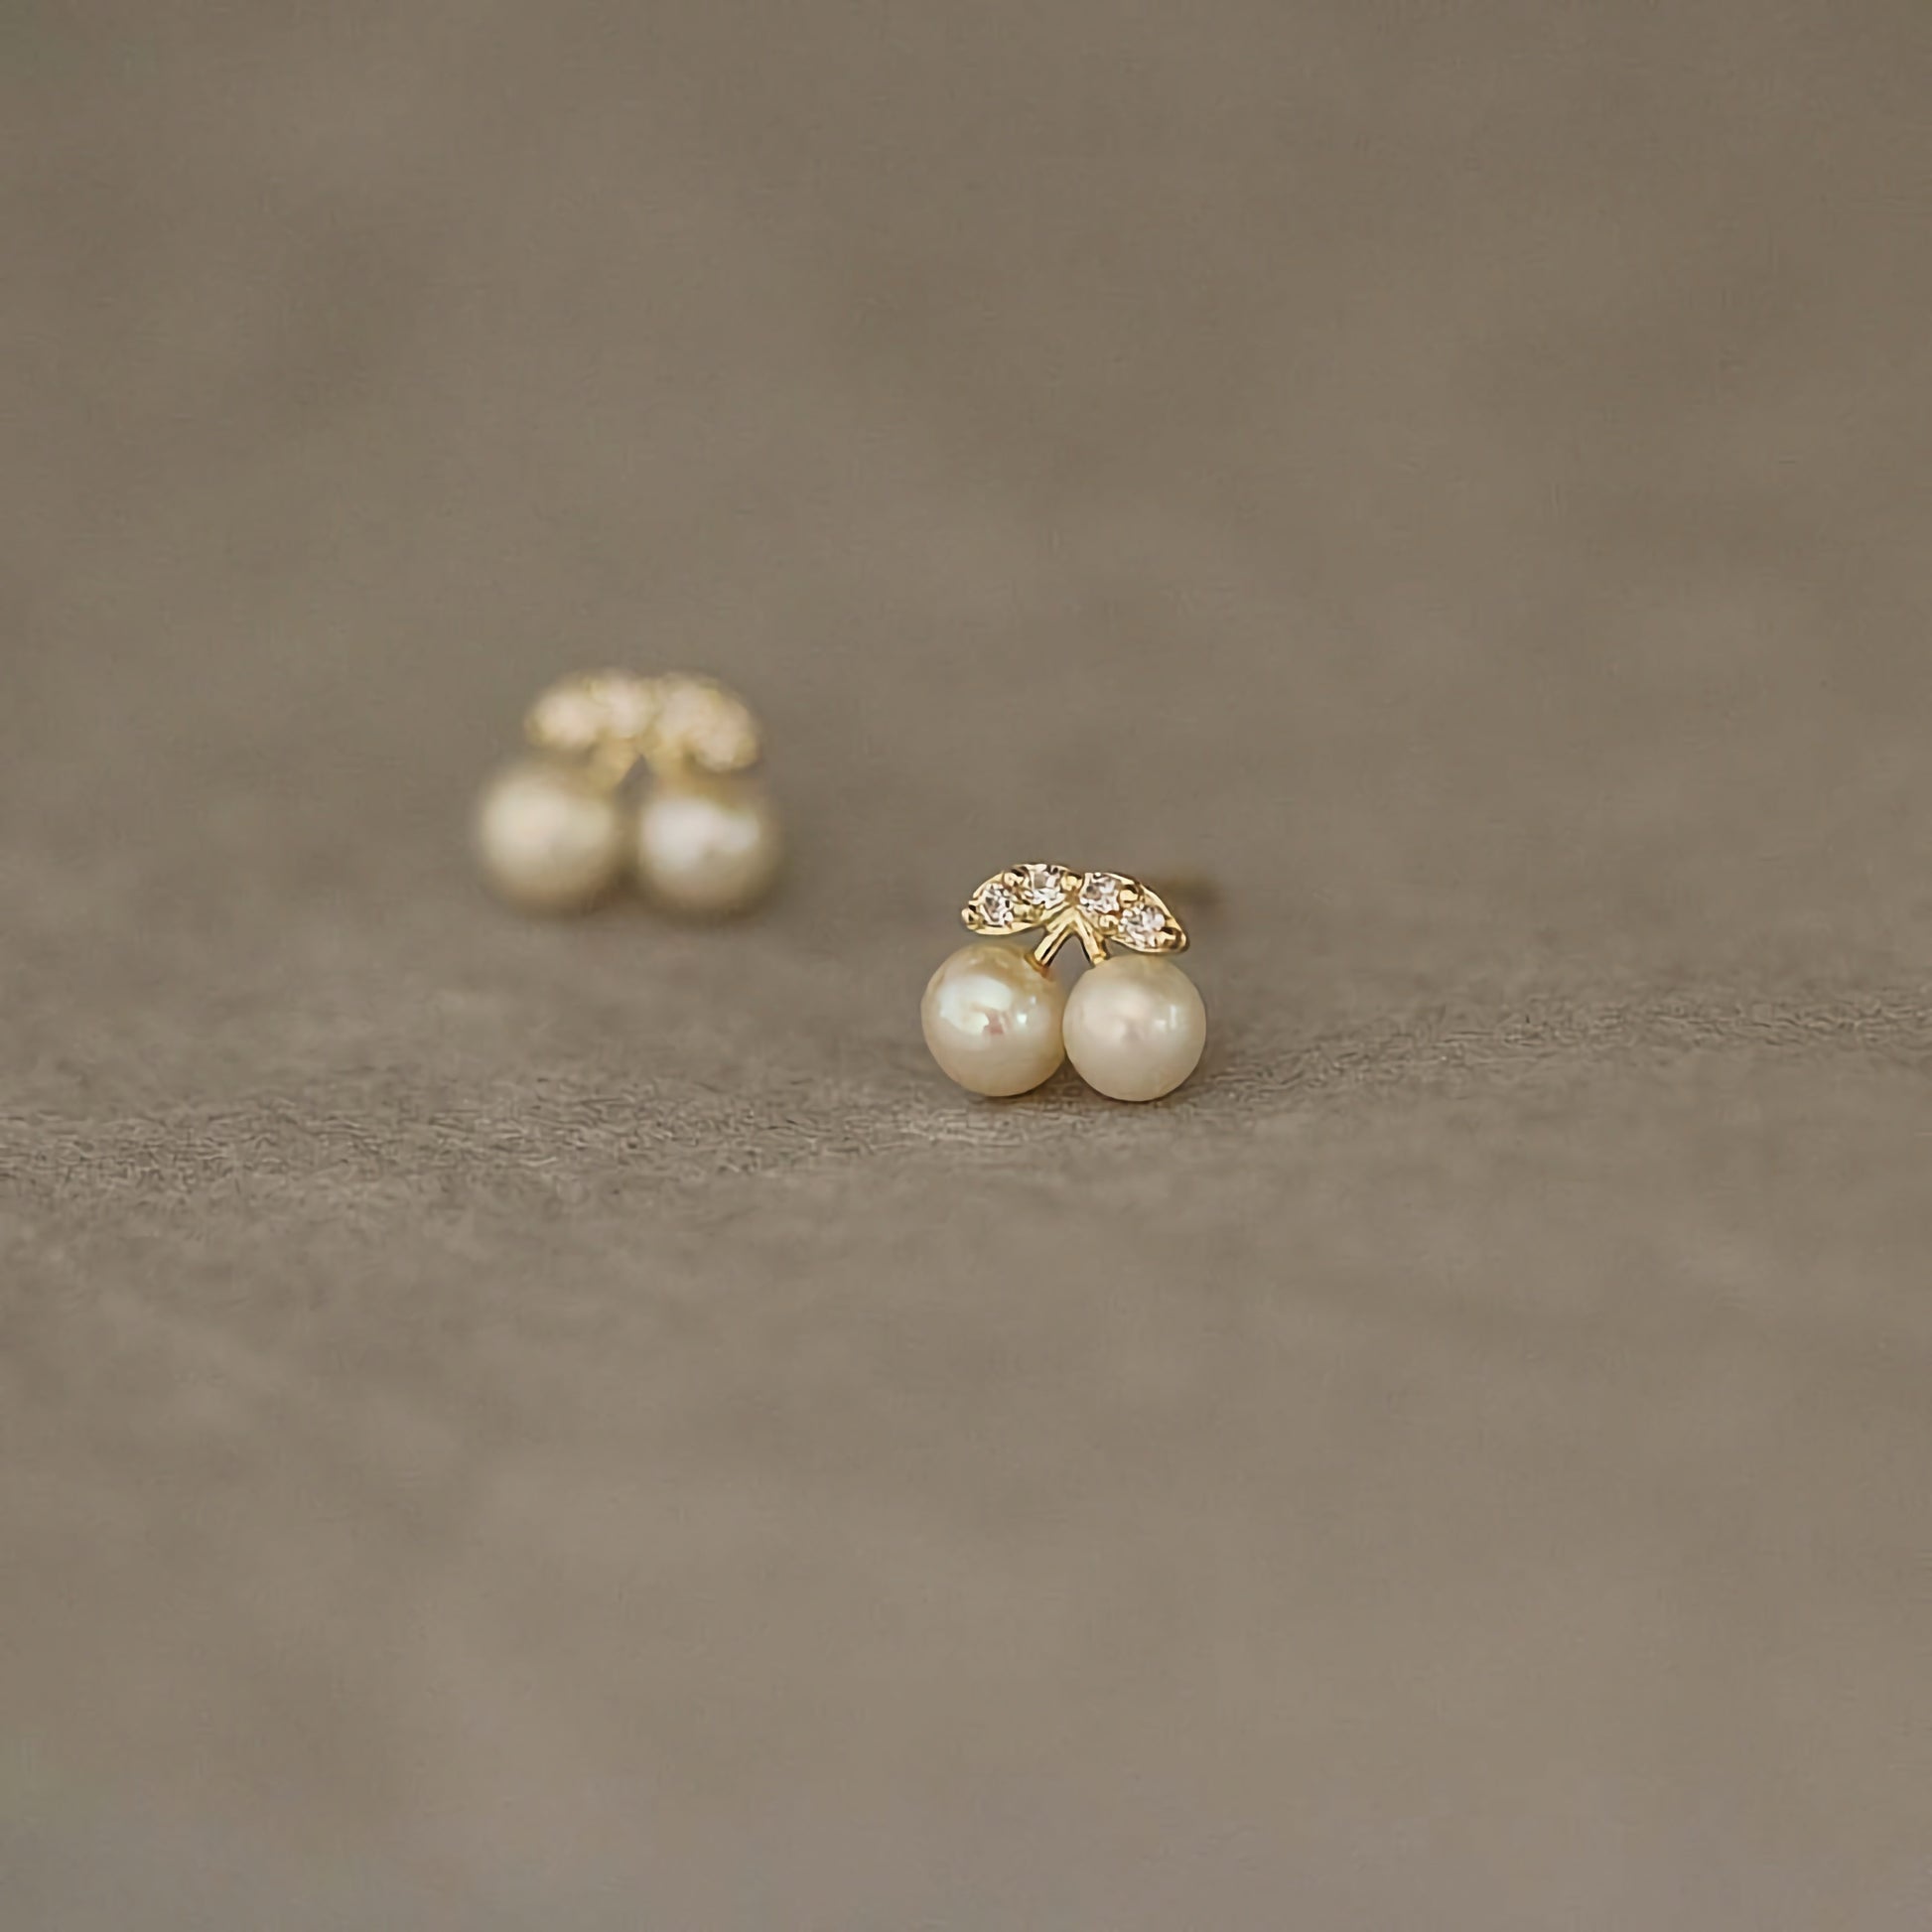 Detail-oriented 9ct solid gold cherry studs with beautiful pearl centers, perfect for a playful yet elegant look.